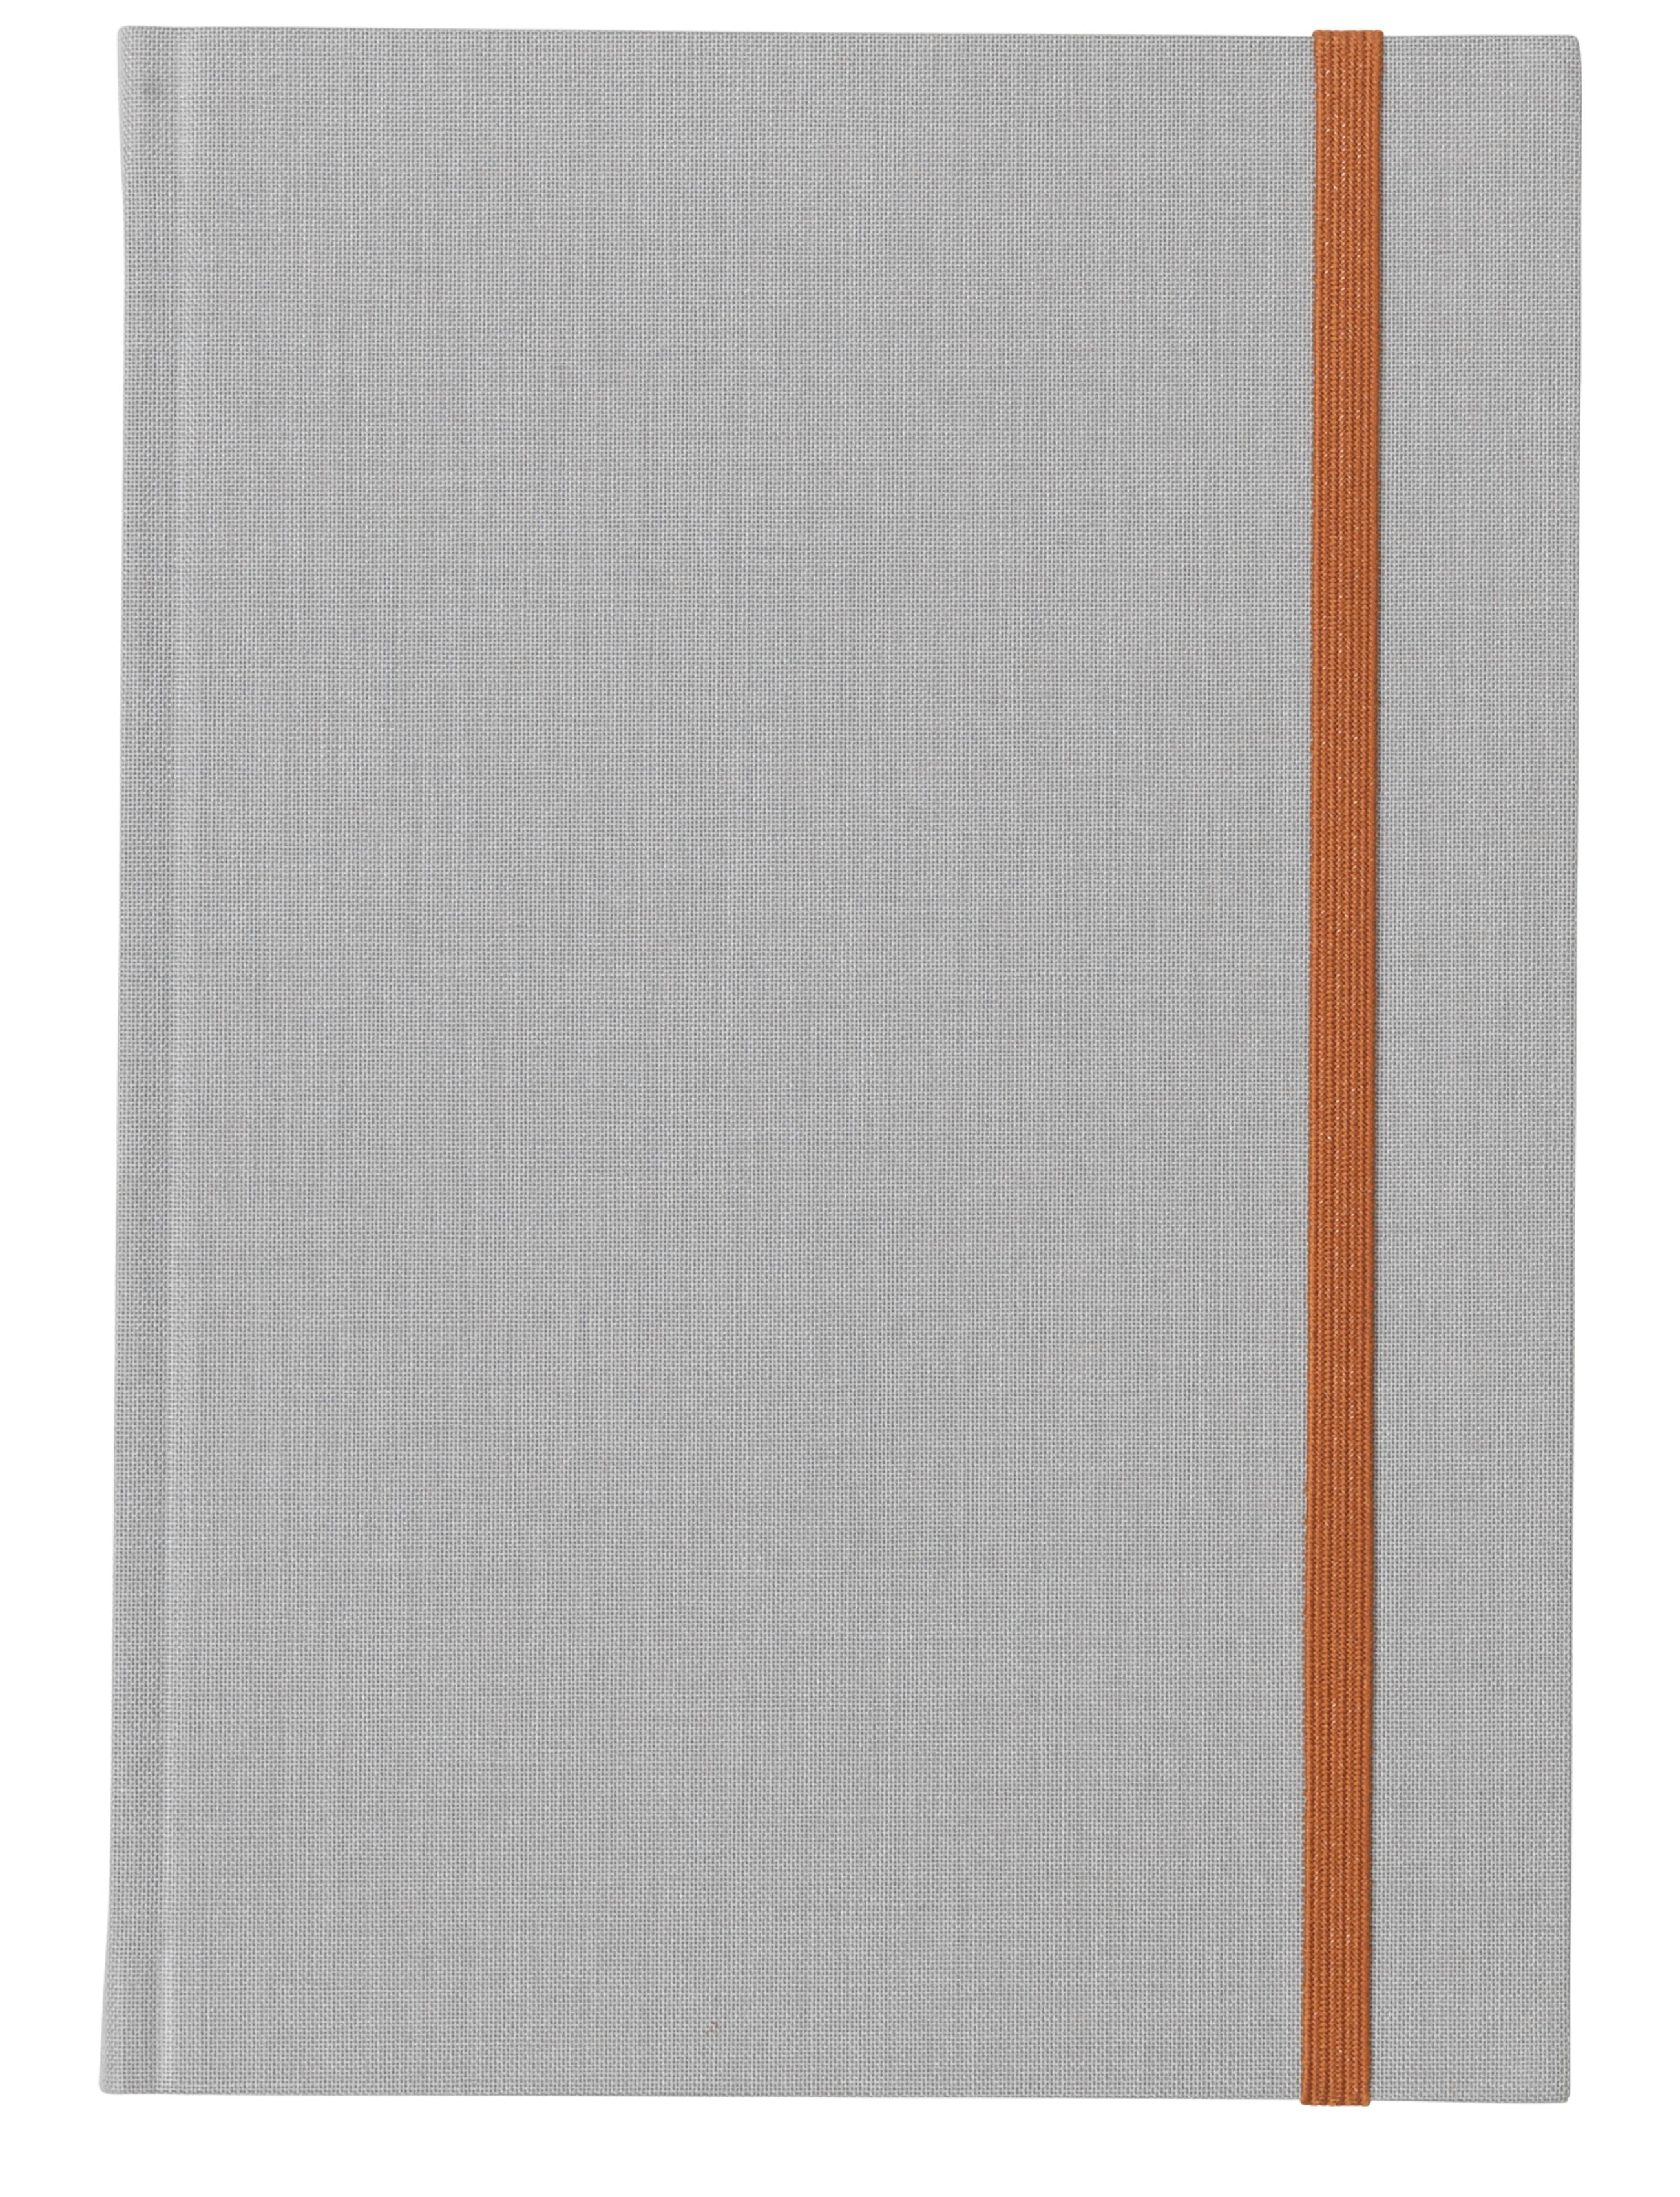 Notem Studio Bea, Notebook With Elastic Band, Light Gray